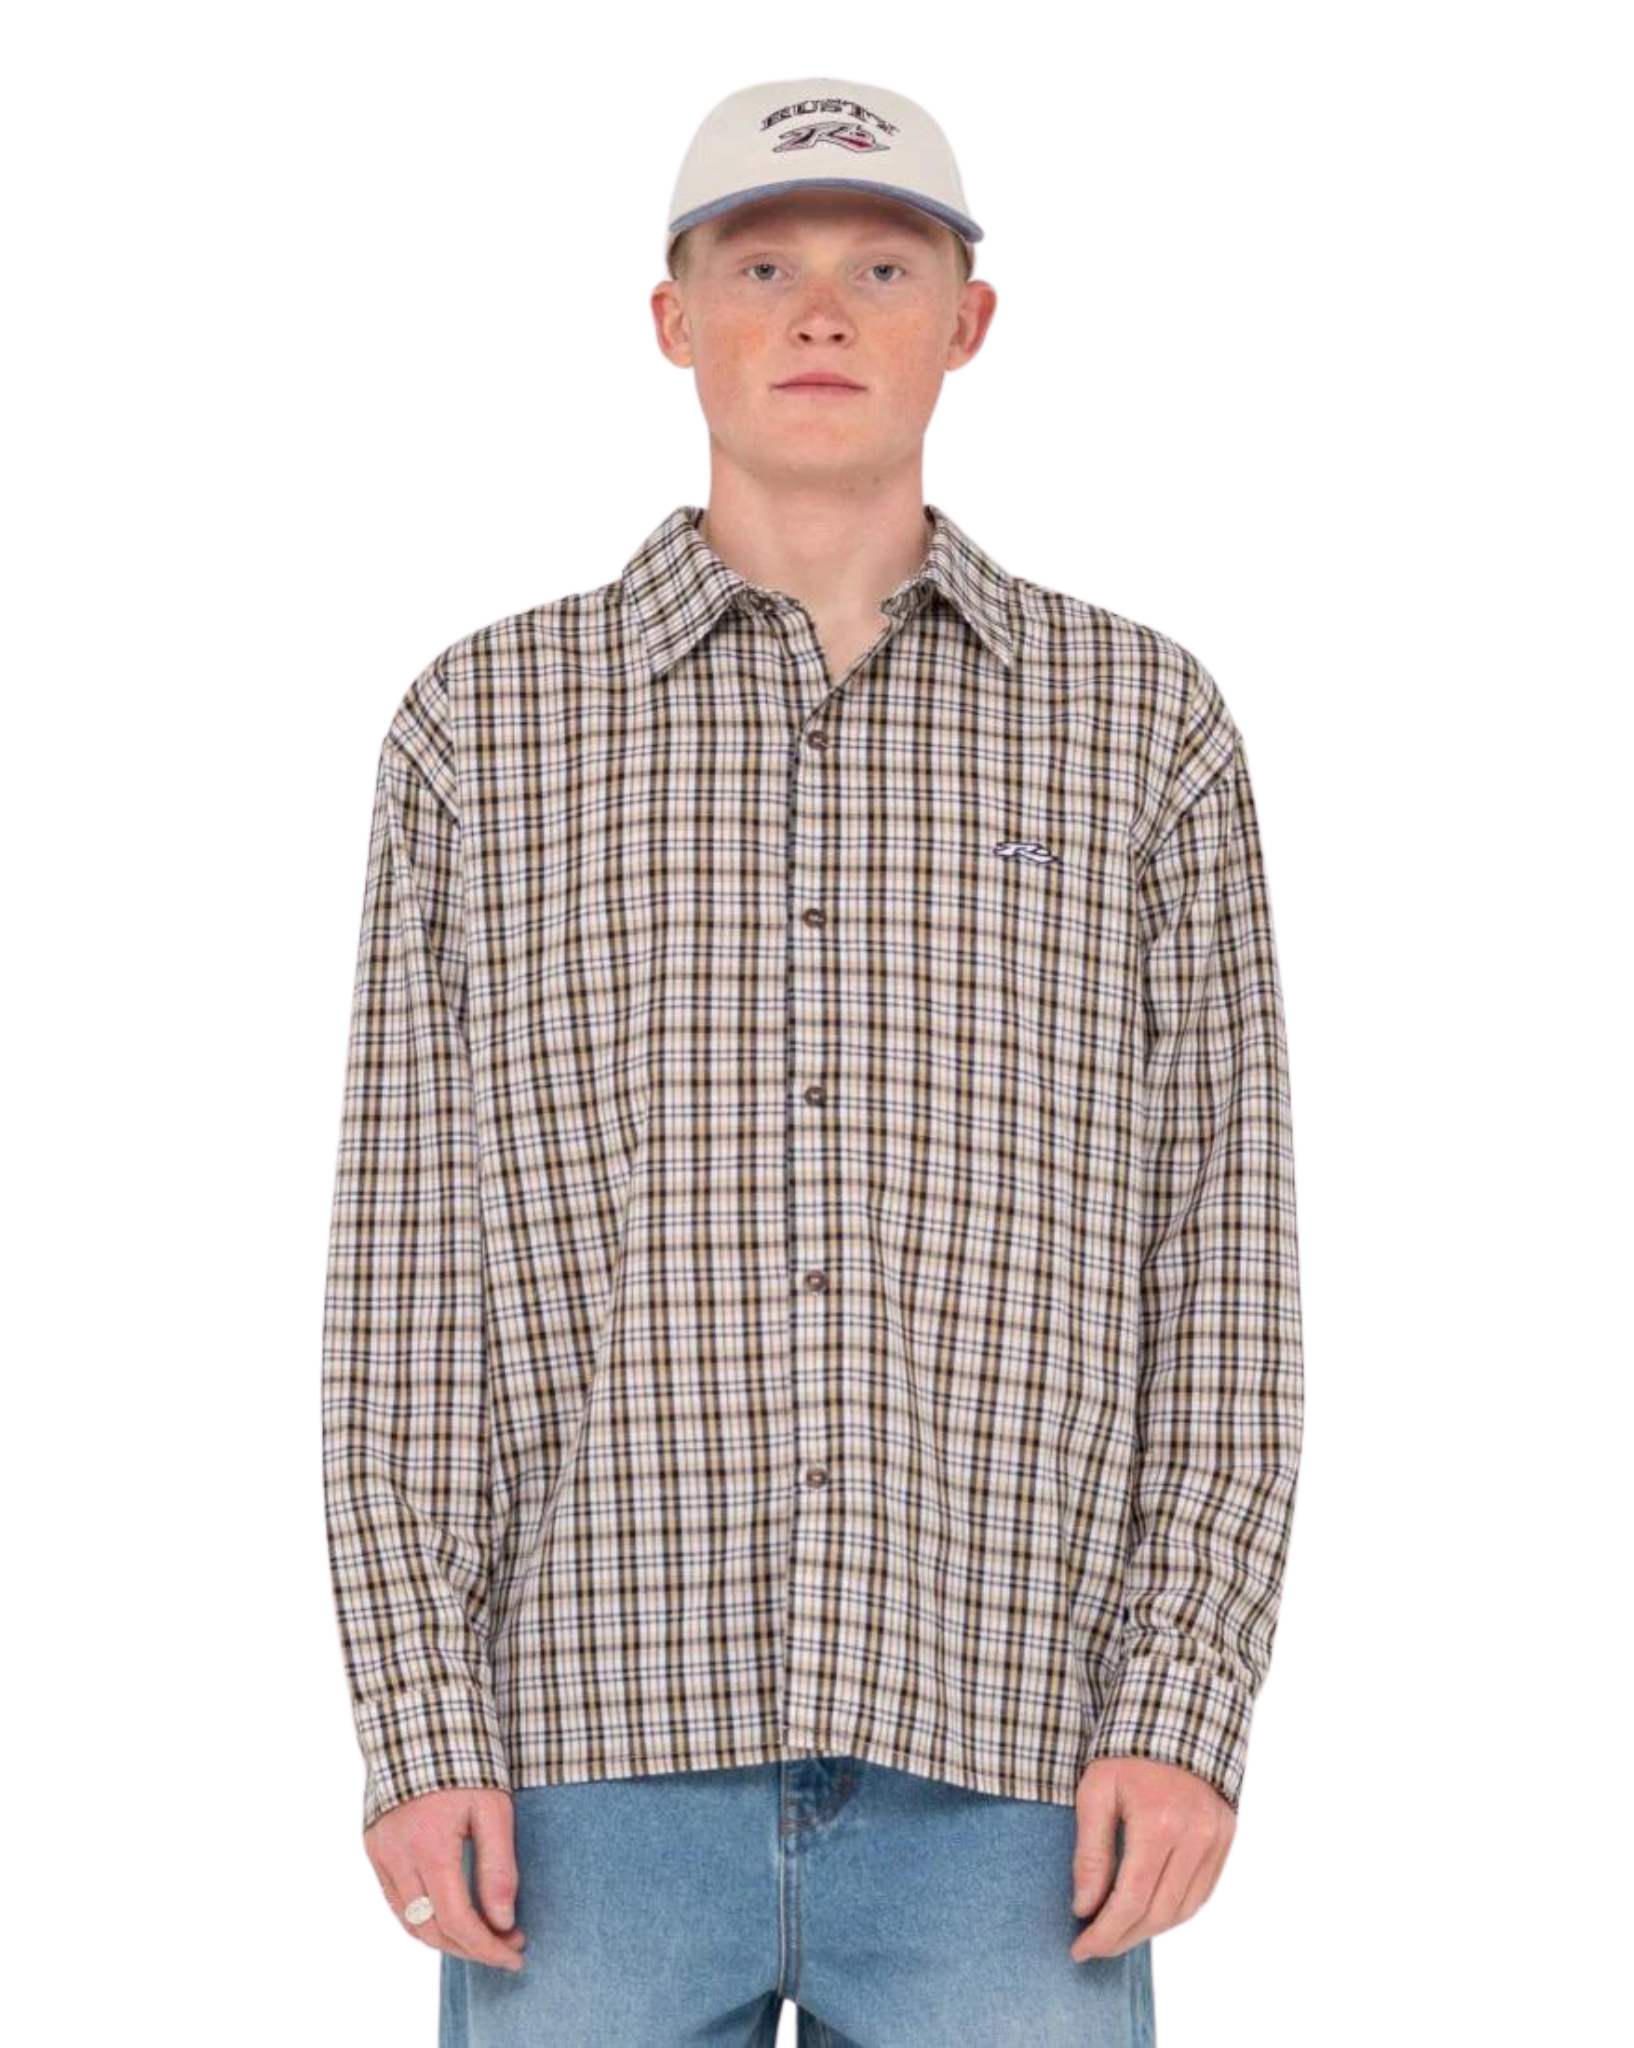 Razor Long Sleeve Rayon Shirt - Available today with Free Shipping!*